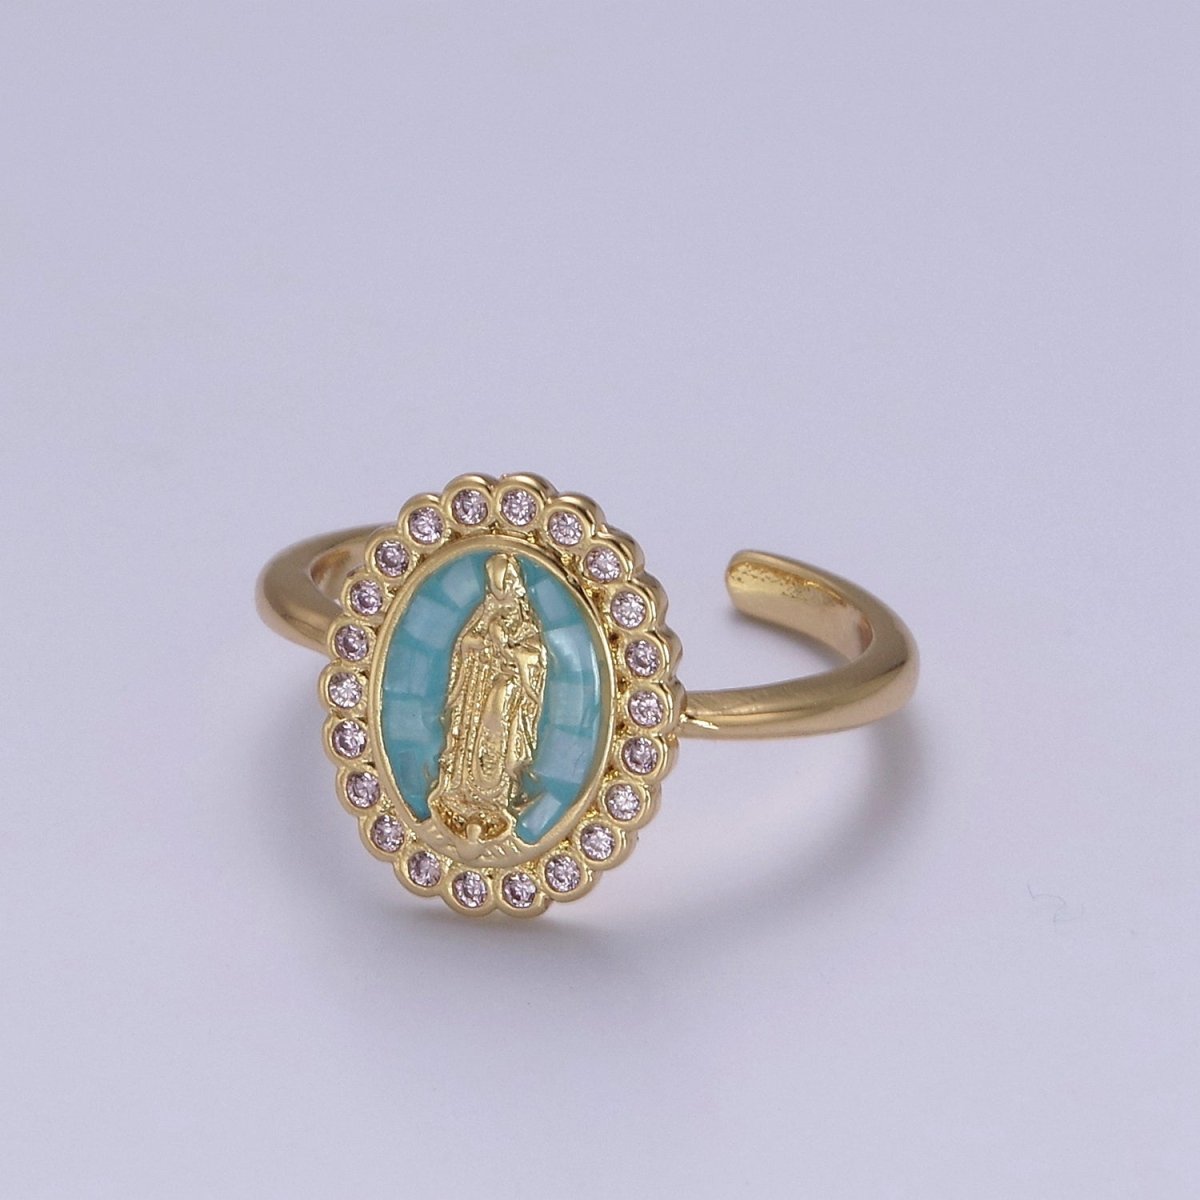 Virgin Mary Ring, 14K Gold Filled Religious Medallion Ring, Mother Mary Statement Ring, cz Lady of Guadalupe Ring S-401 to S-404 - DLUXCA